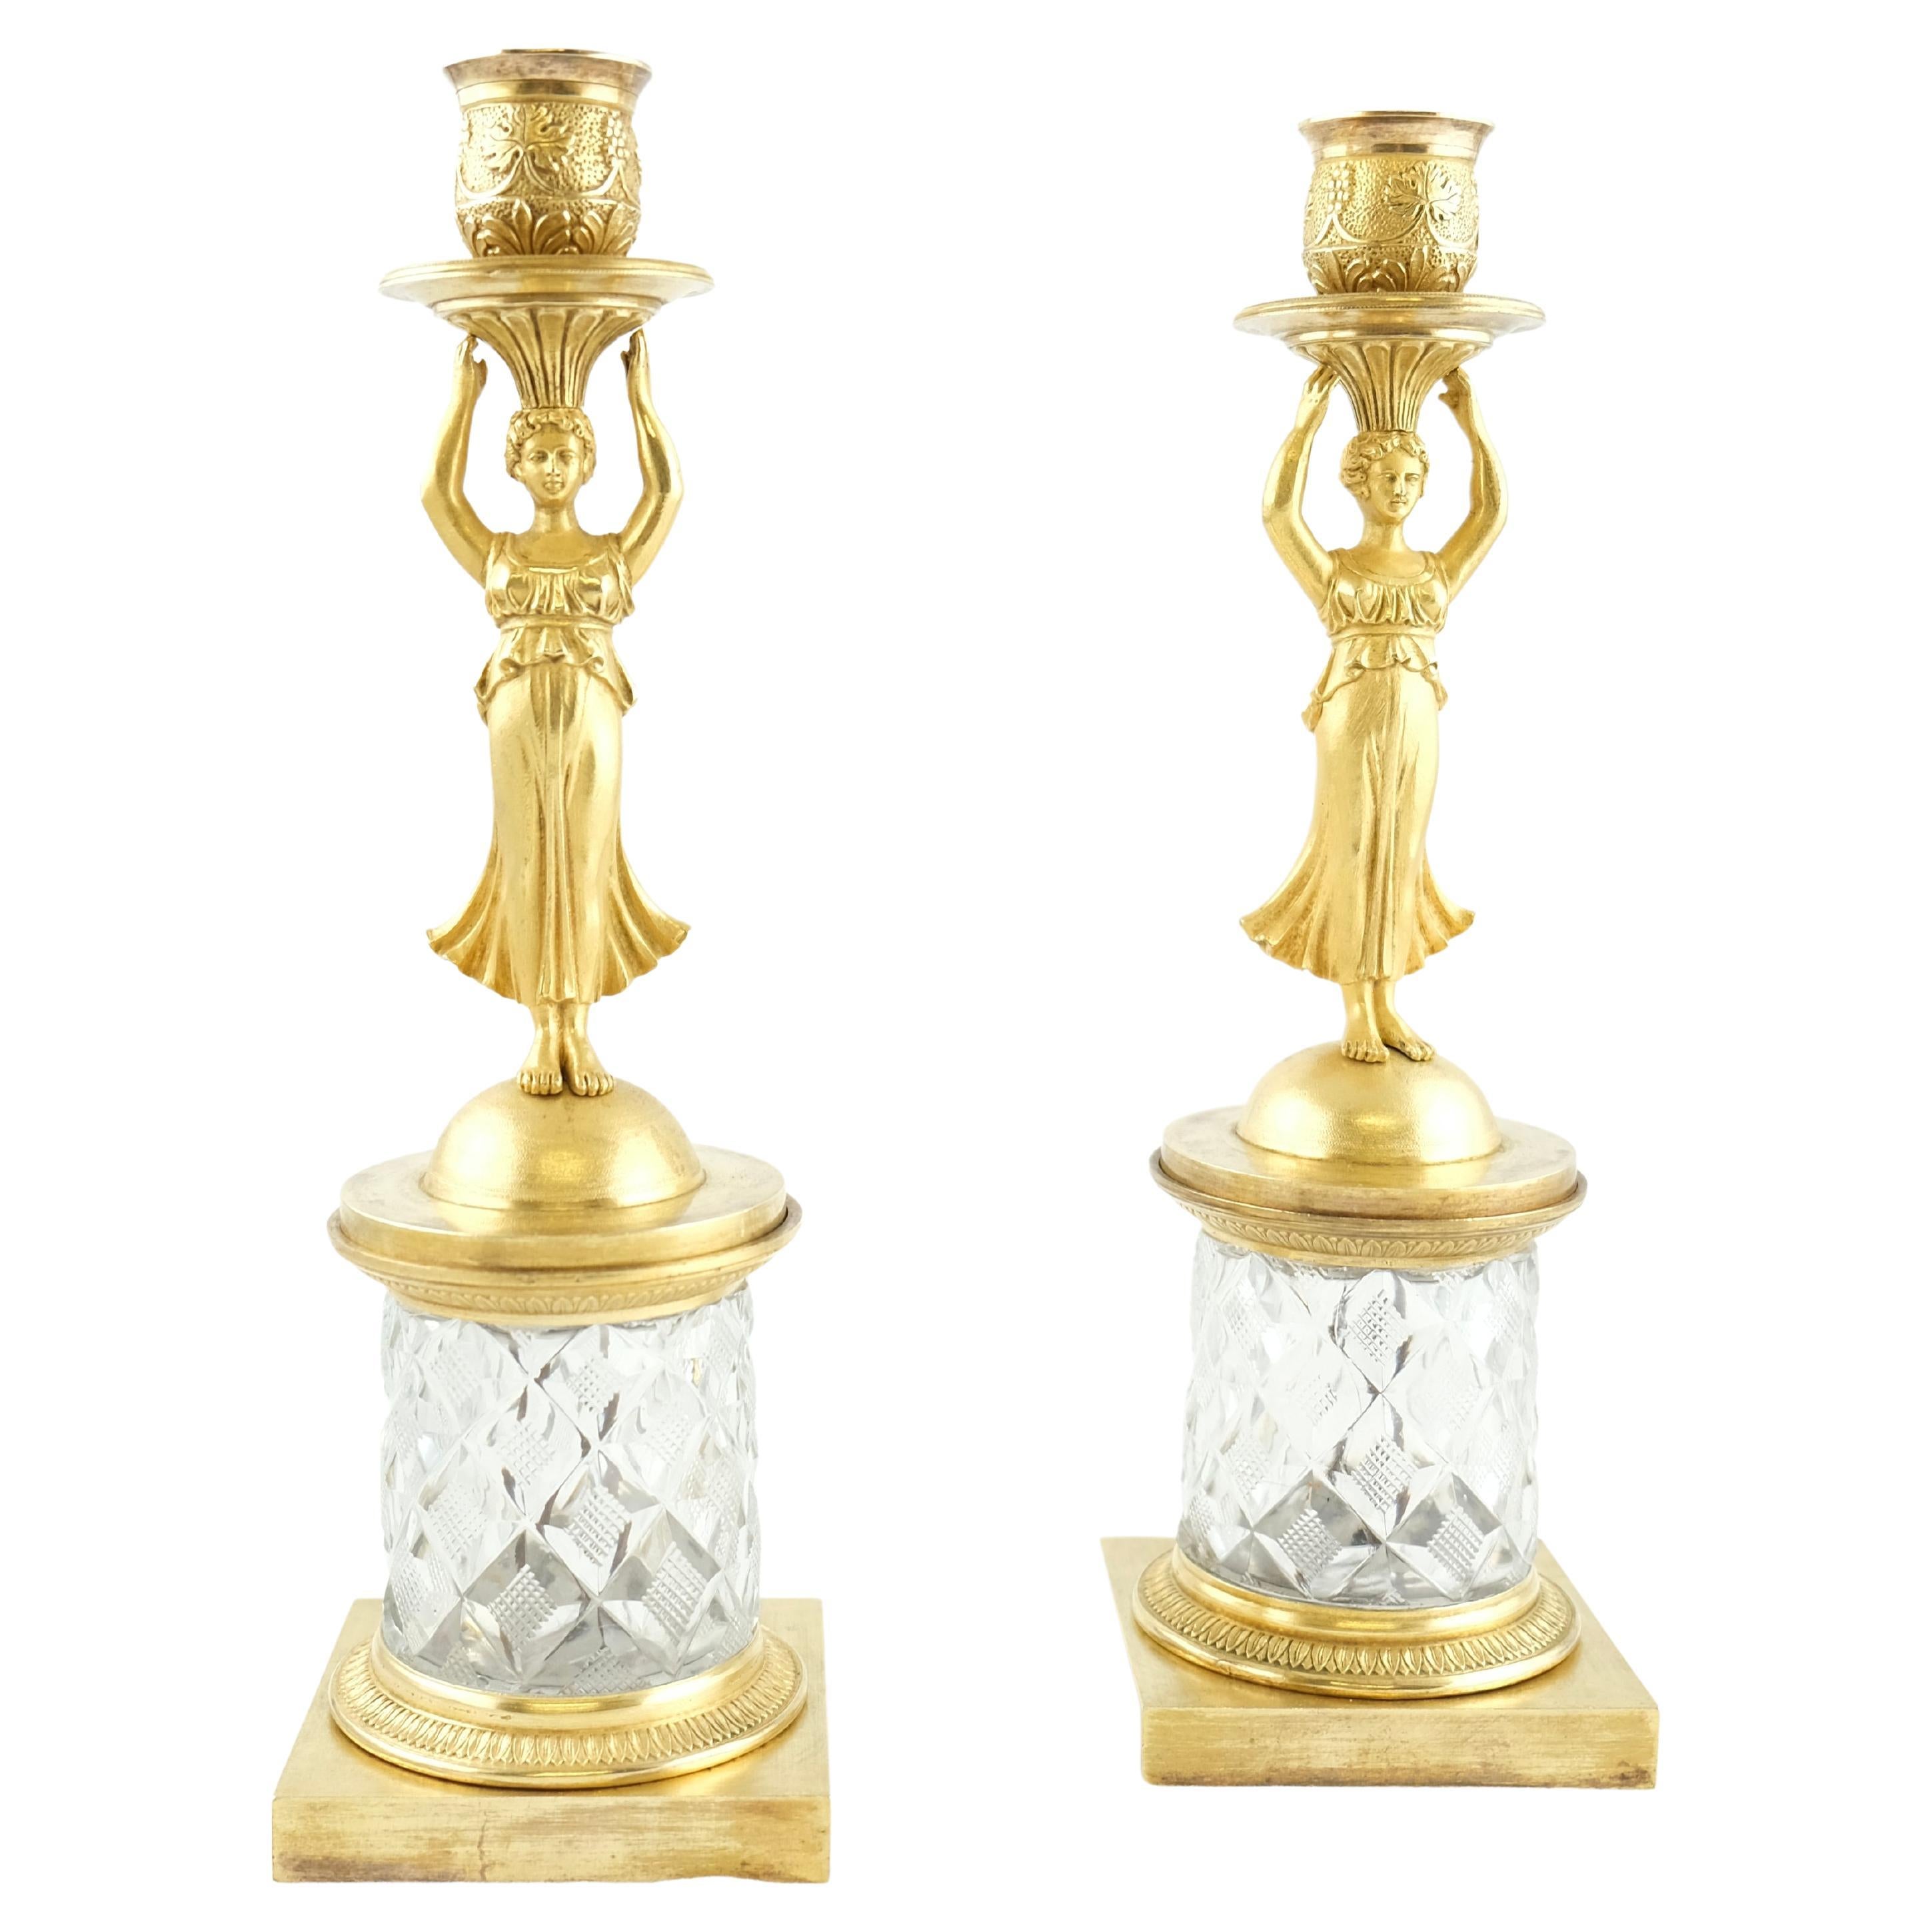 Pair of Empire Gilt Bronze and Cut Crystal Candlesticks, Ca 1810